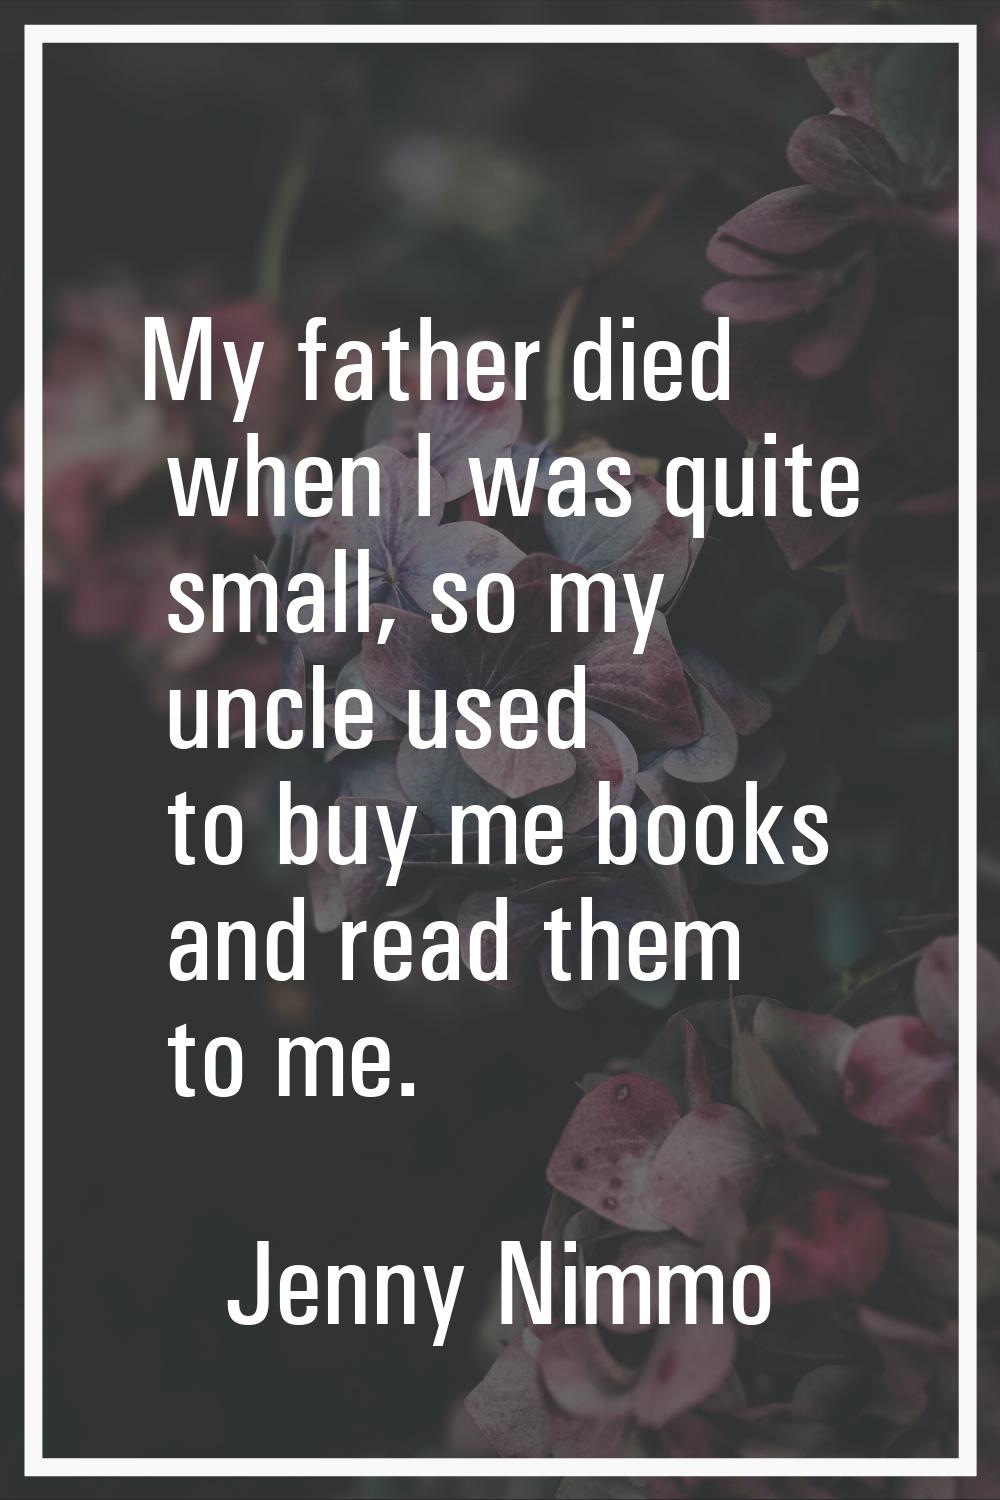 My father died when I was quite small, so my uncle used to buy me books and read them to me.